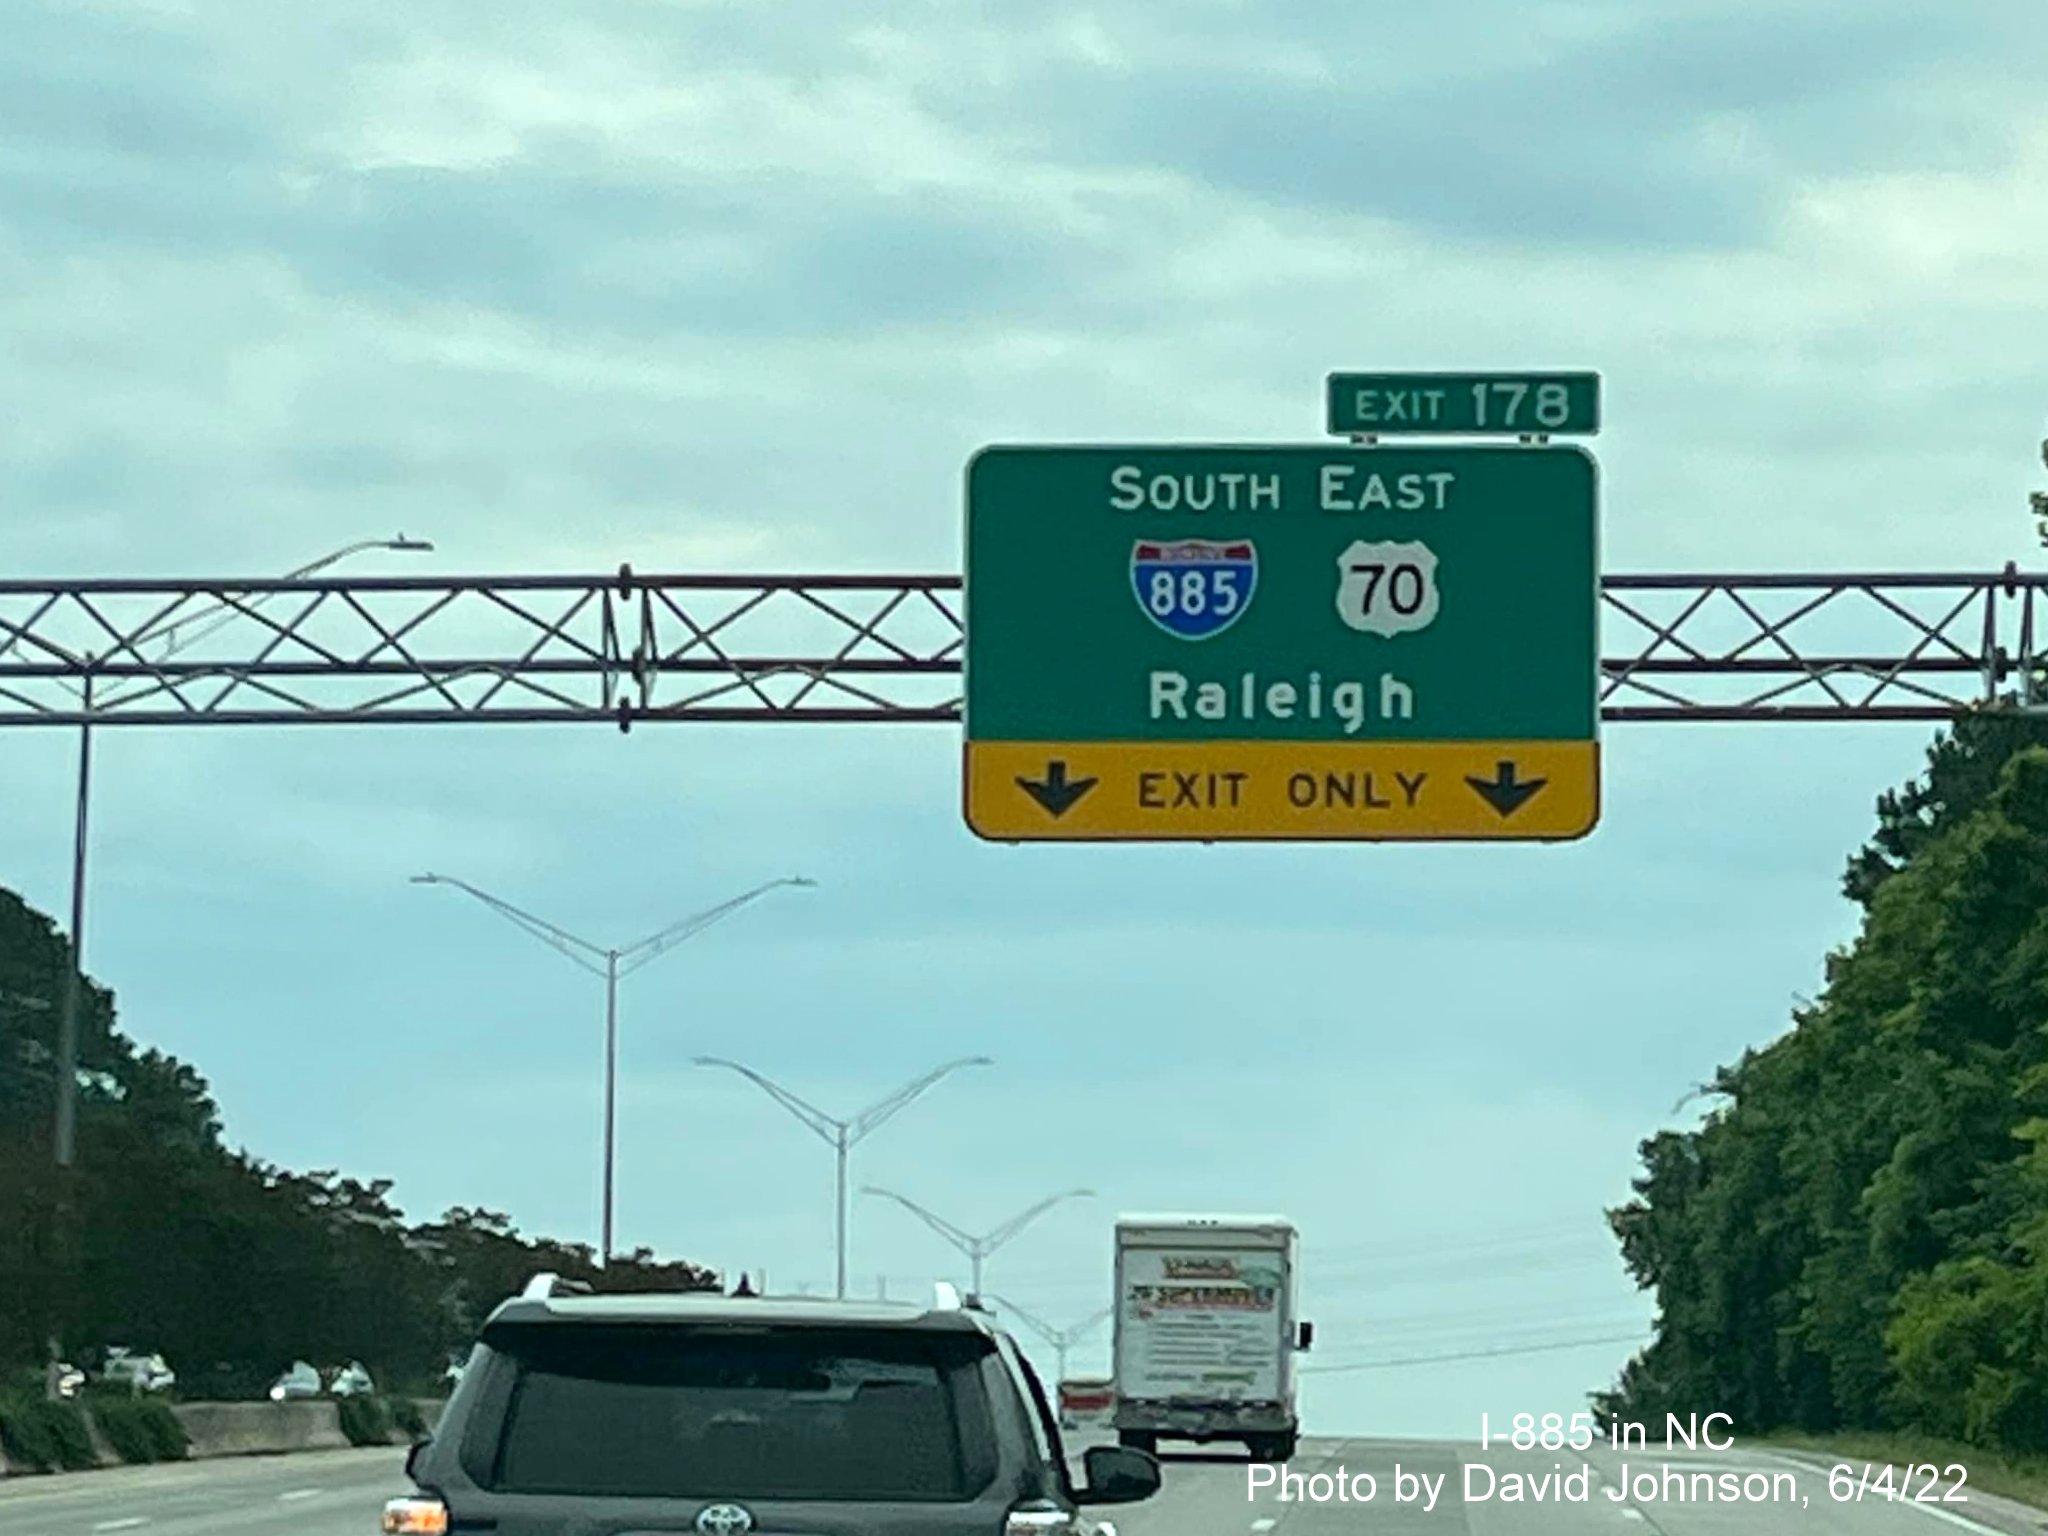 Image of new 1/2 mile advance sign with I-885 shield on I-85 North in Durham on I-85 North, by David Johnson, June 2022